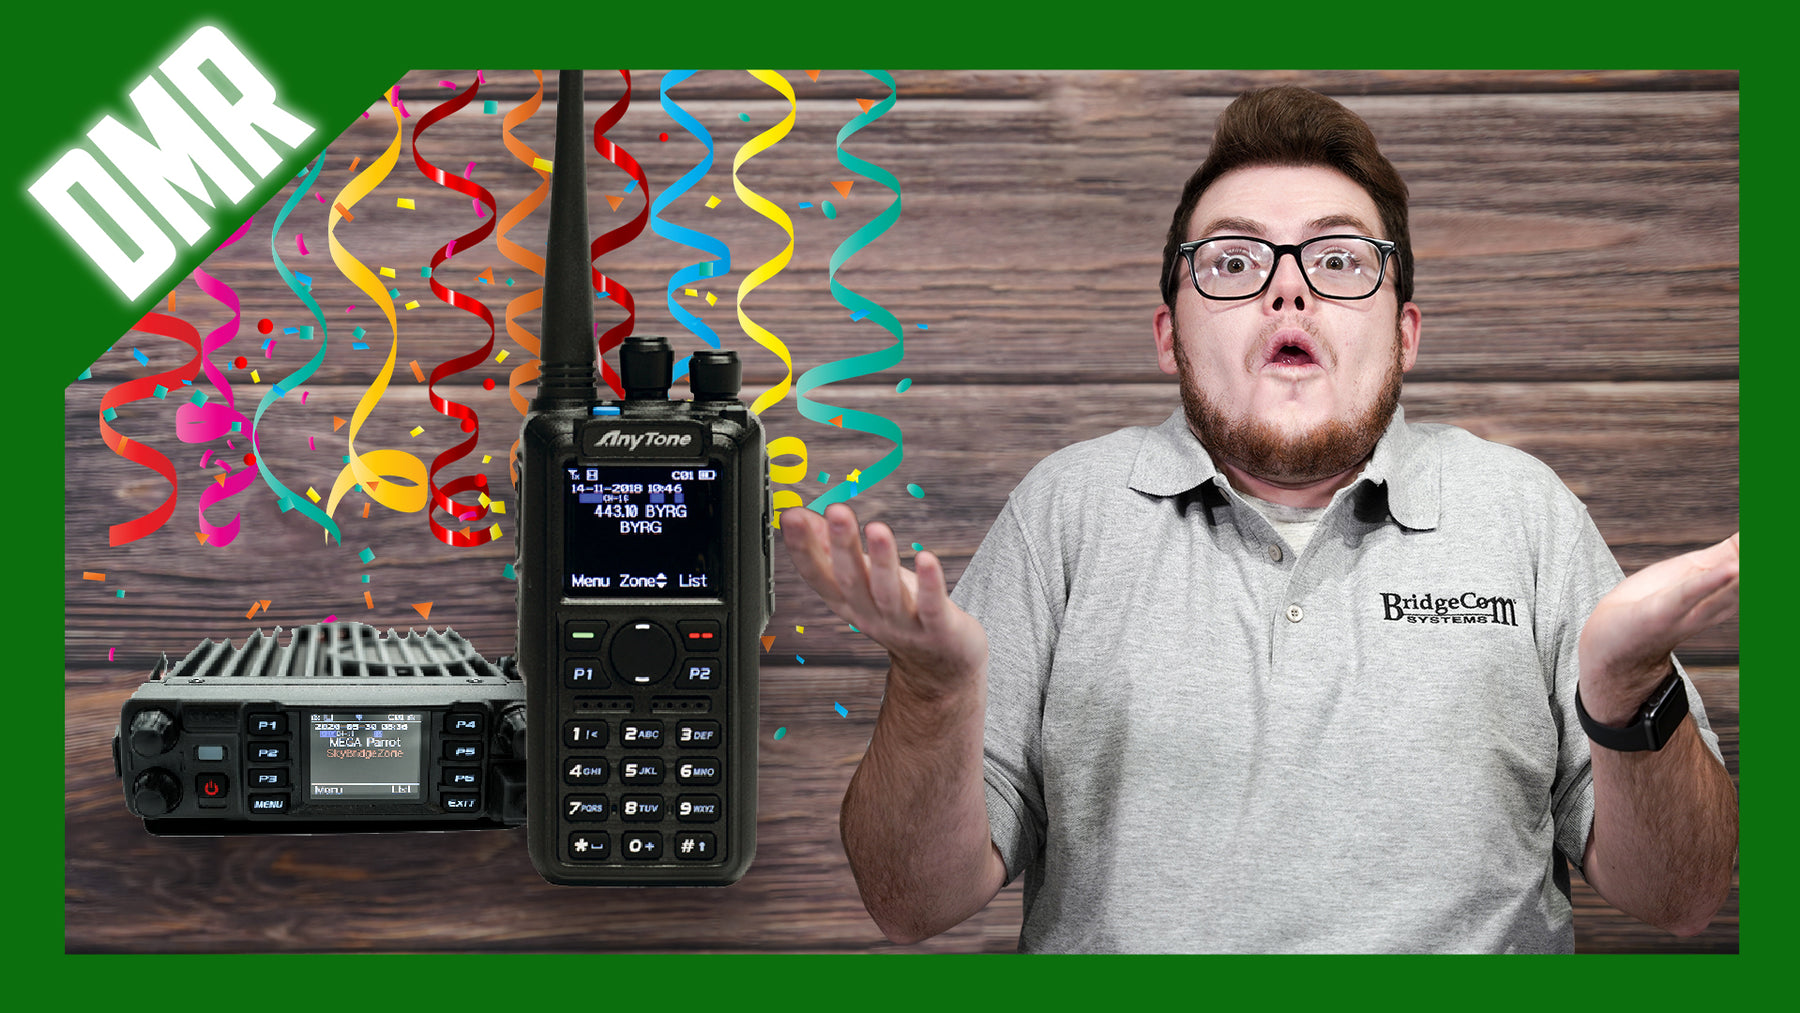 5 Facts You Didn't Know About DMR Radio